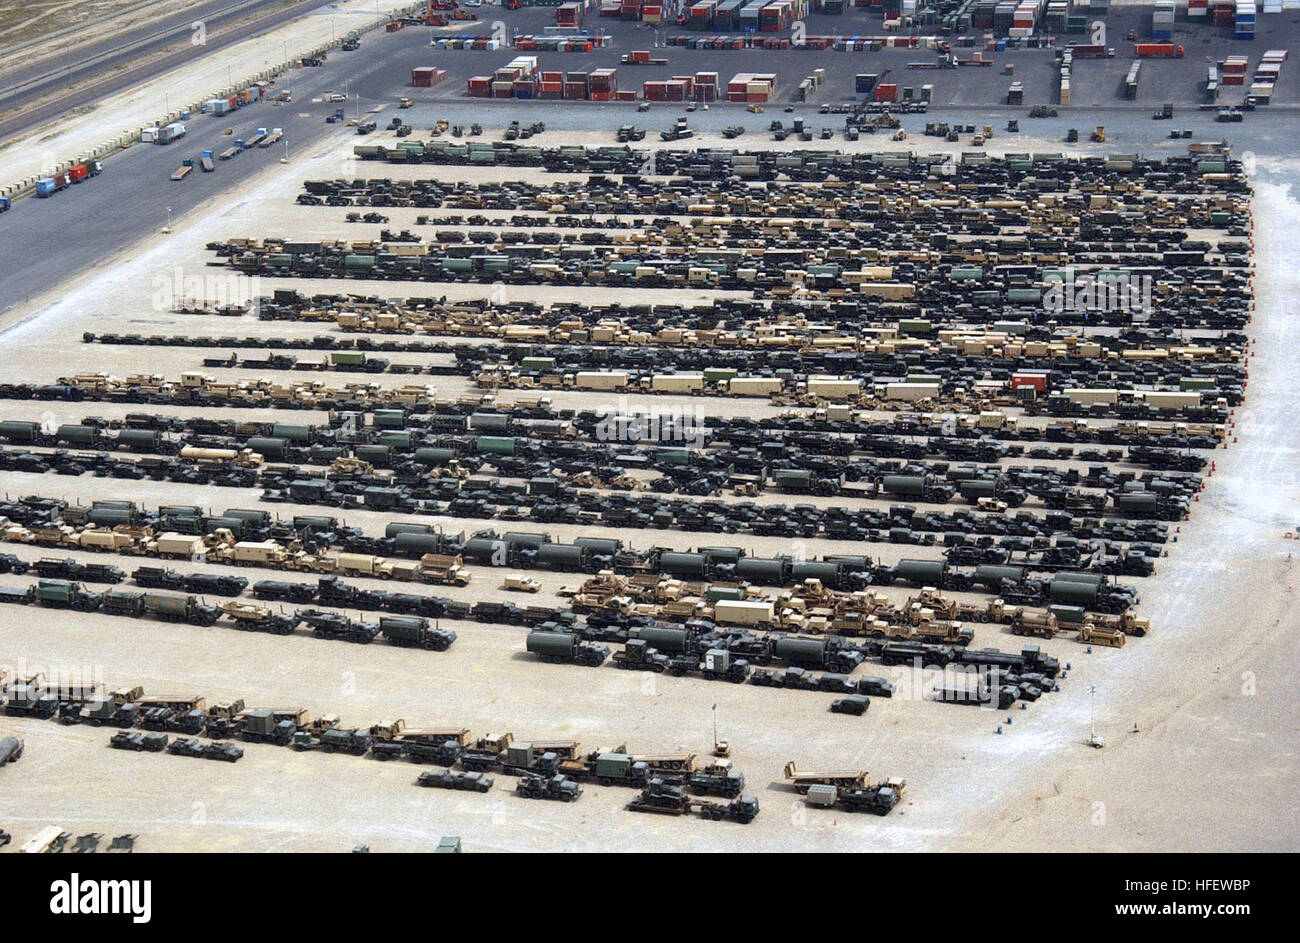 040302-N-0743B-069 Ash-Shu’aibah, Kuwait (Mar. 1, 2004) – Aerial view of equipment staging terminals at Ash-Shu'aibah, Kuwait’s port facility.  U.S. Military Sealift Command (MSC) is currently offloading tons of equipment and supplies needed to support the continued security and rebuilding of Iraq. MSC is the transportation provider for the Department of Defense with the responsibility of providing strategic sealift and ocean transportation for all military forces overseas. U.S. Navy photo by Journalist 3rd Class Eric L. Beauregard (RELEASED) US Navy 040302-N-0743B-069 Aerial view of equipment Stock Photo